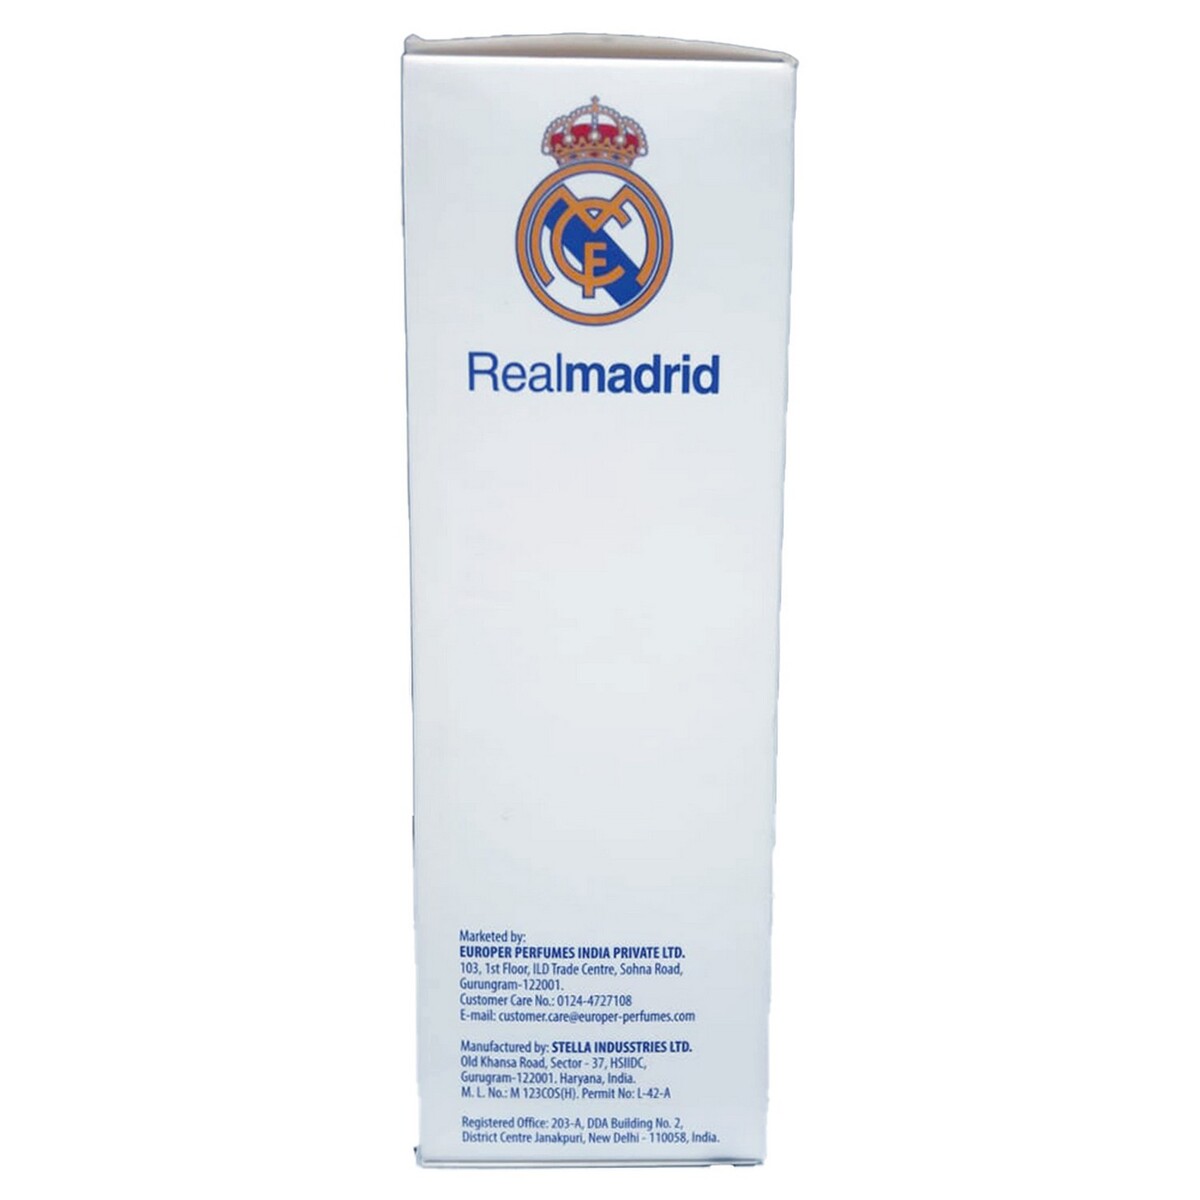 Real Madrid Unisex Deo Assorted 200ml 1+1